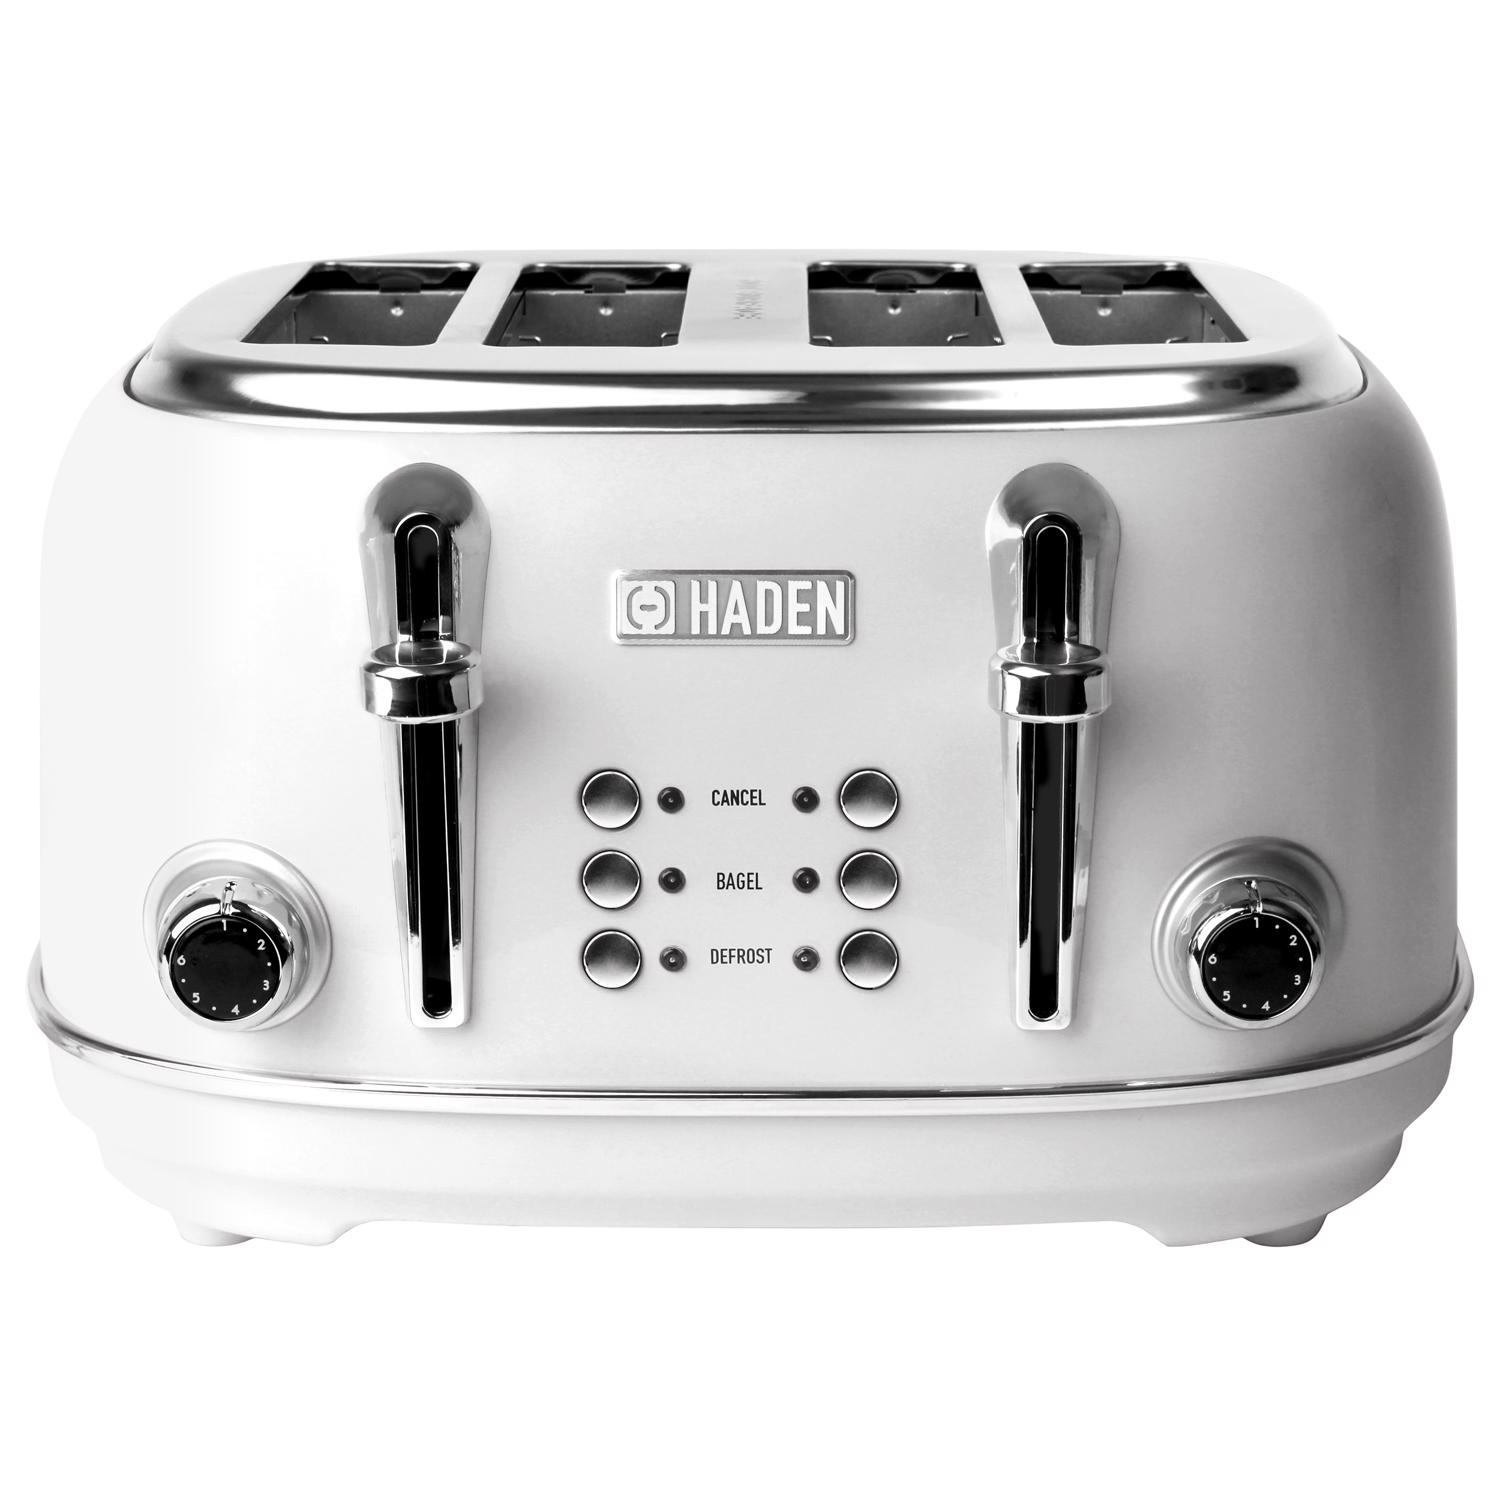 Photos - Toaster Haden Heritage Stainless Steel White 4 slot  8 in. H X 13 in. W X 1 